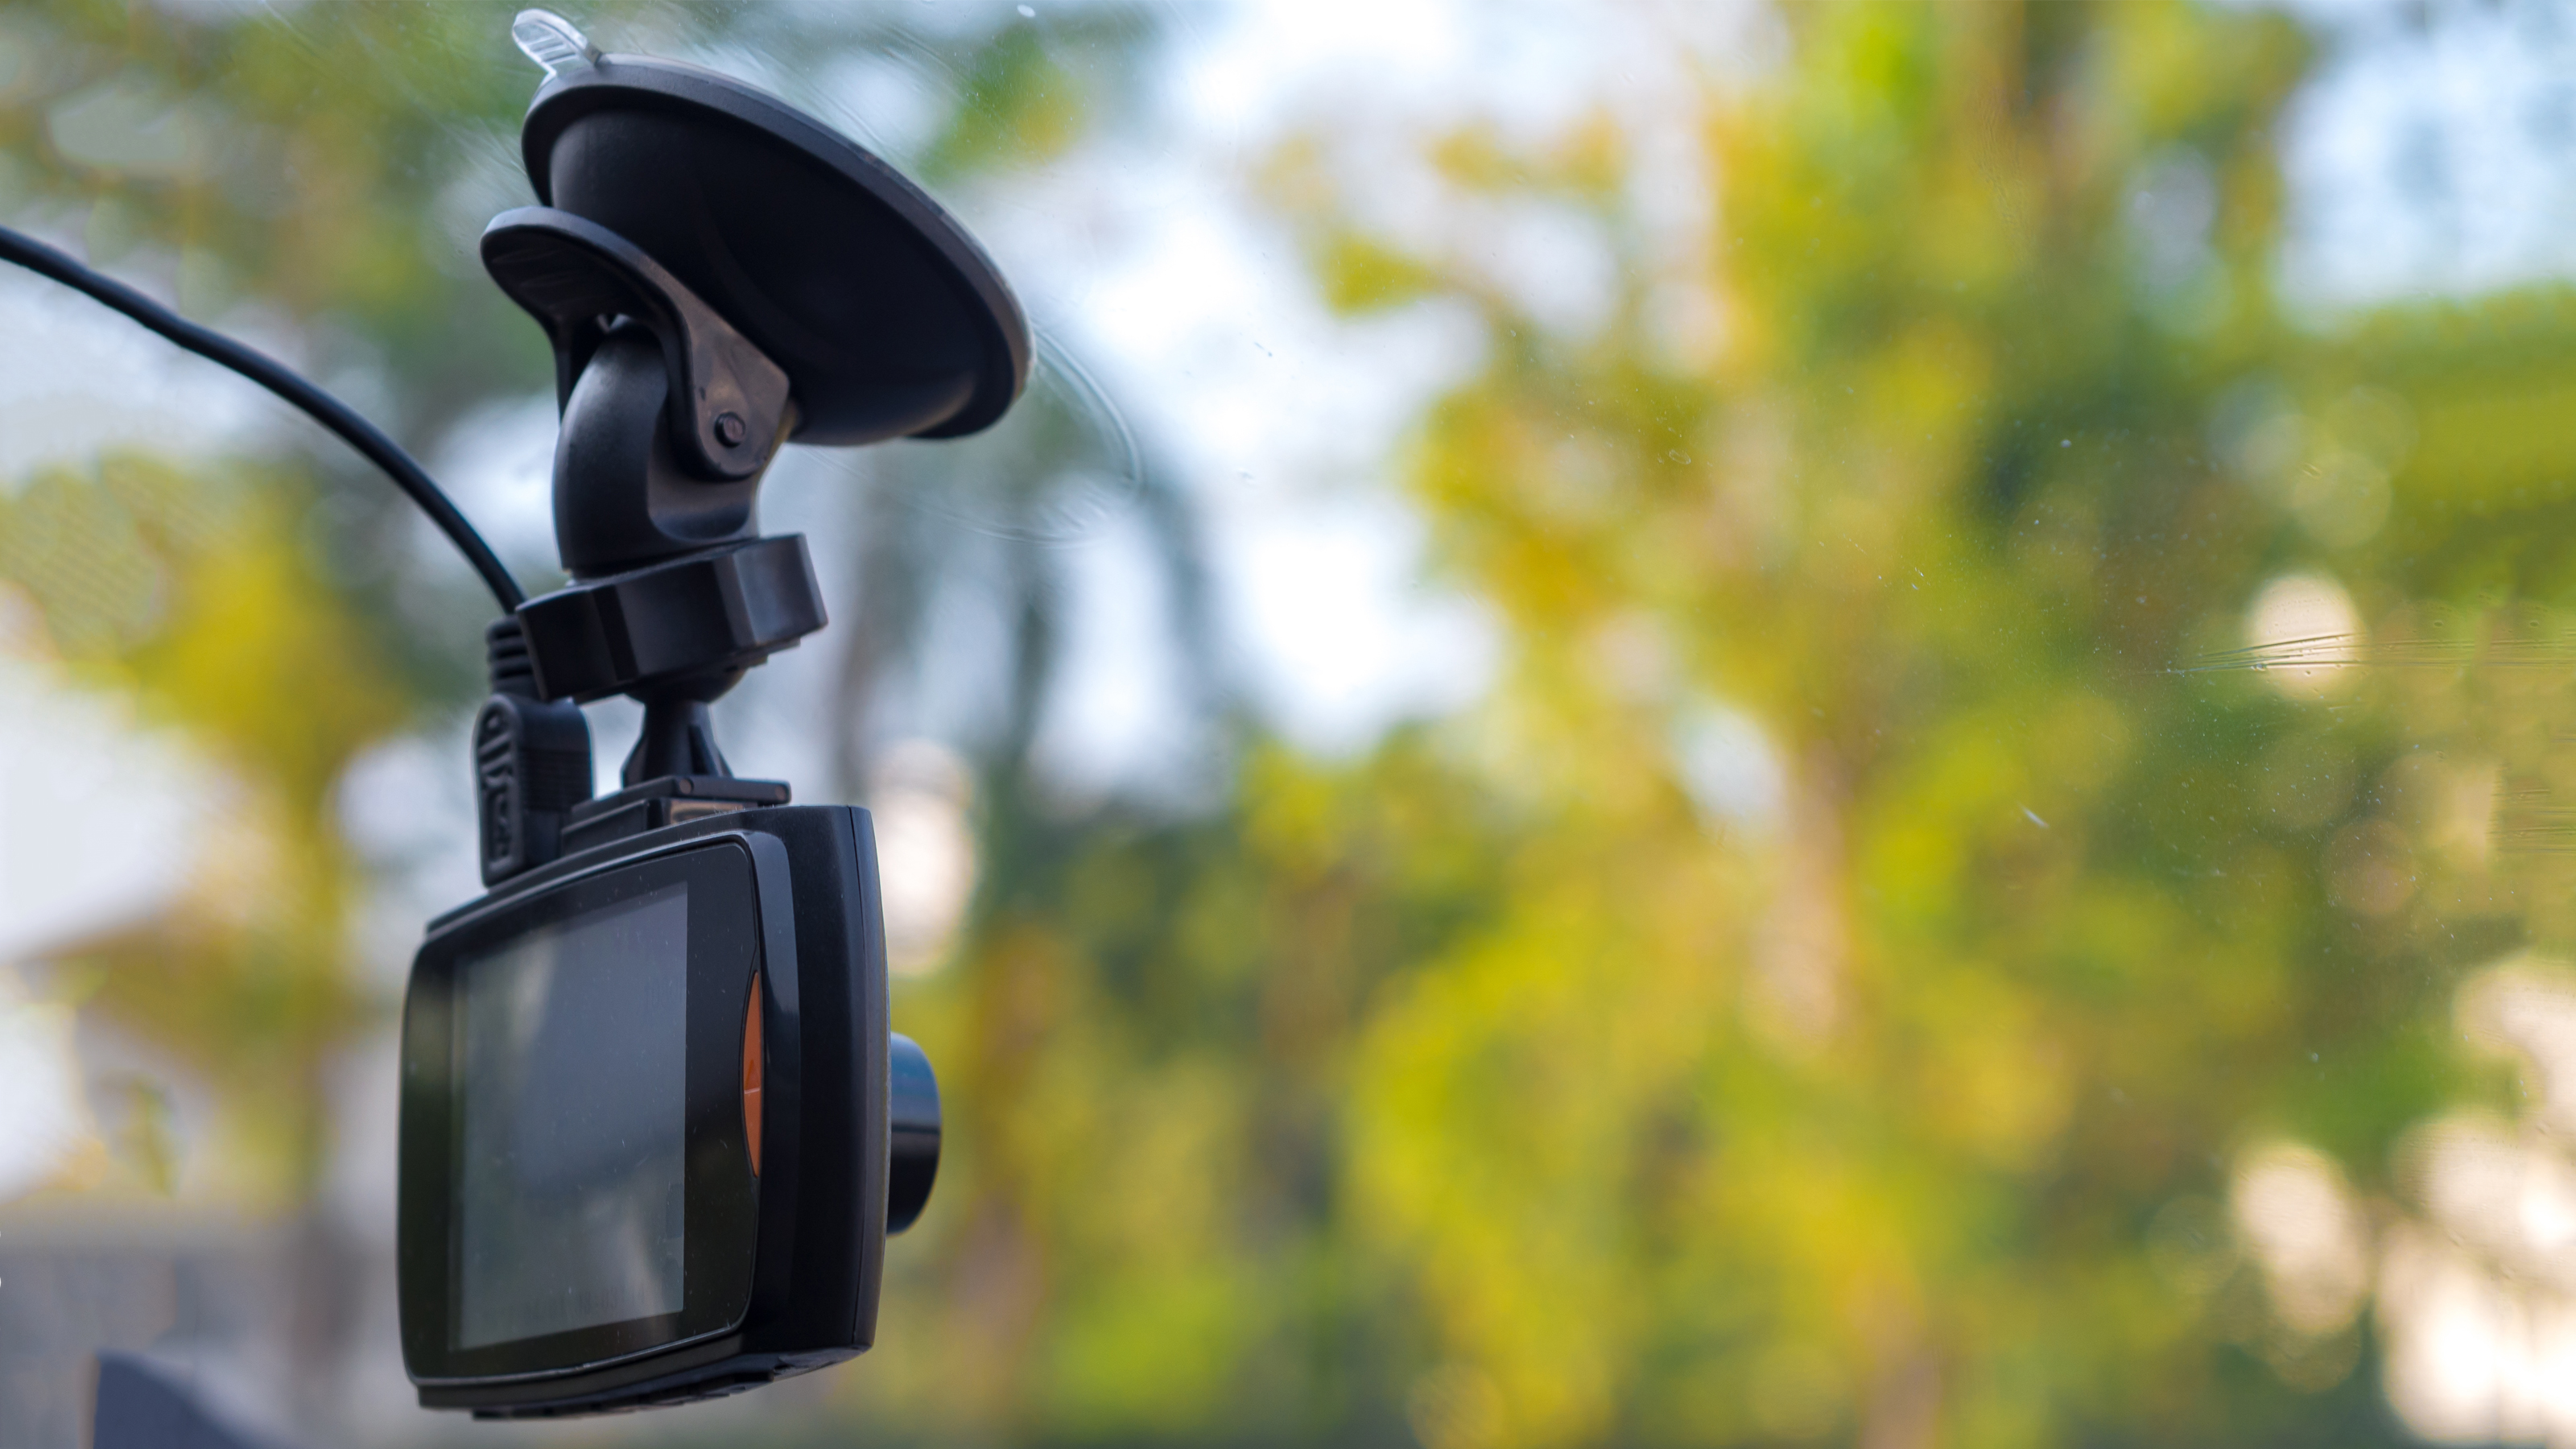 A dash cam mounted on a windshield using a suction mount